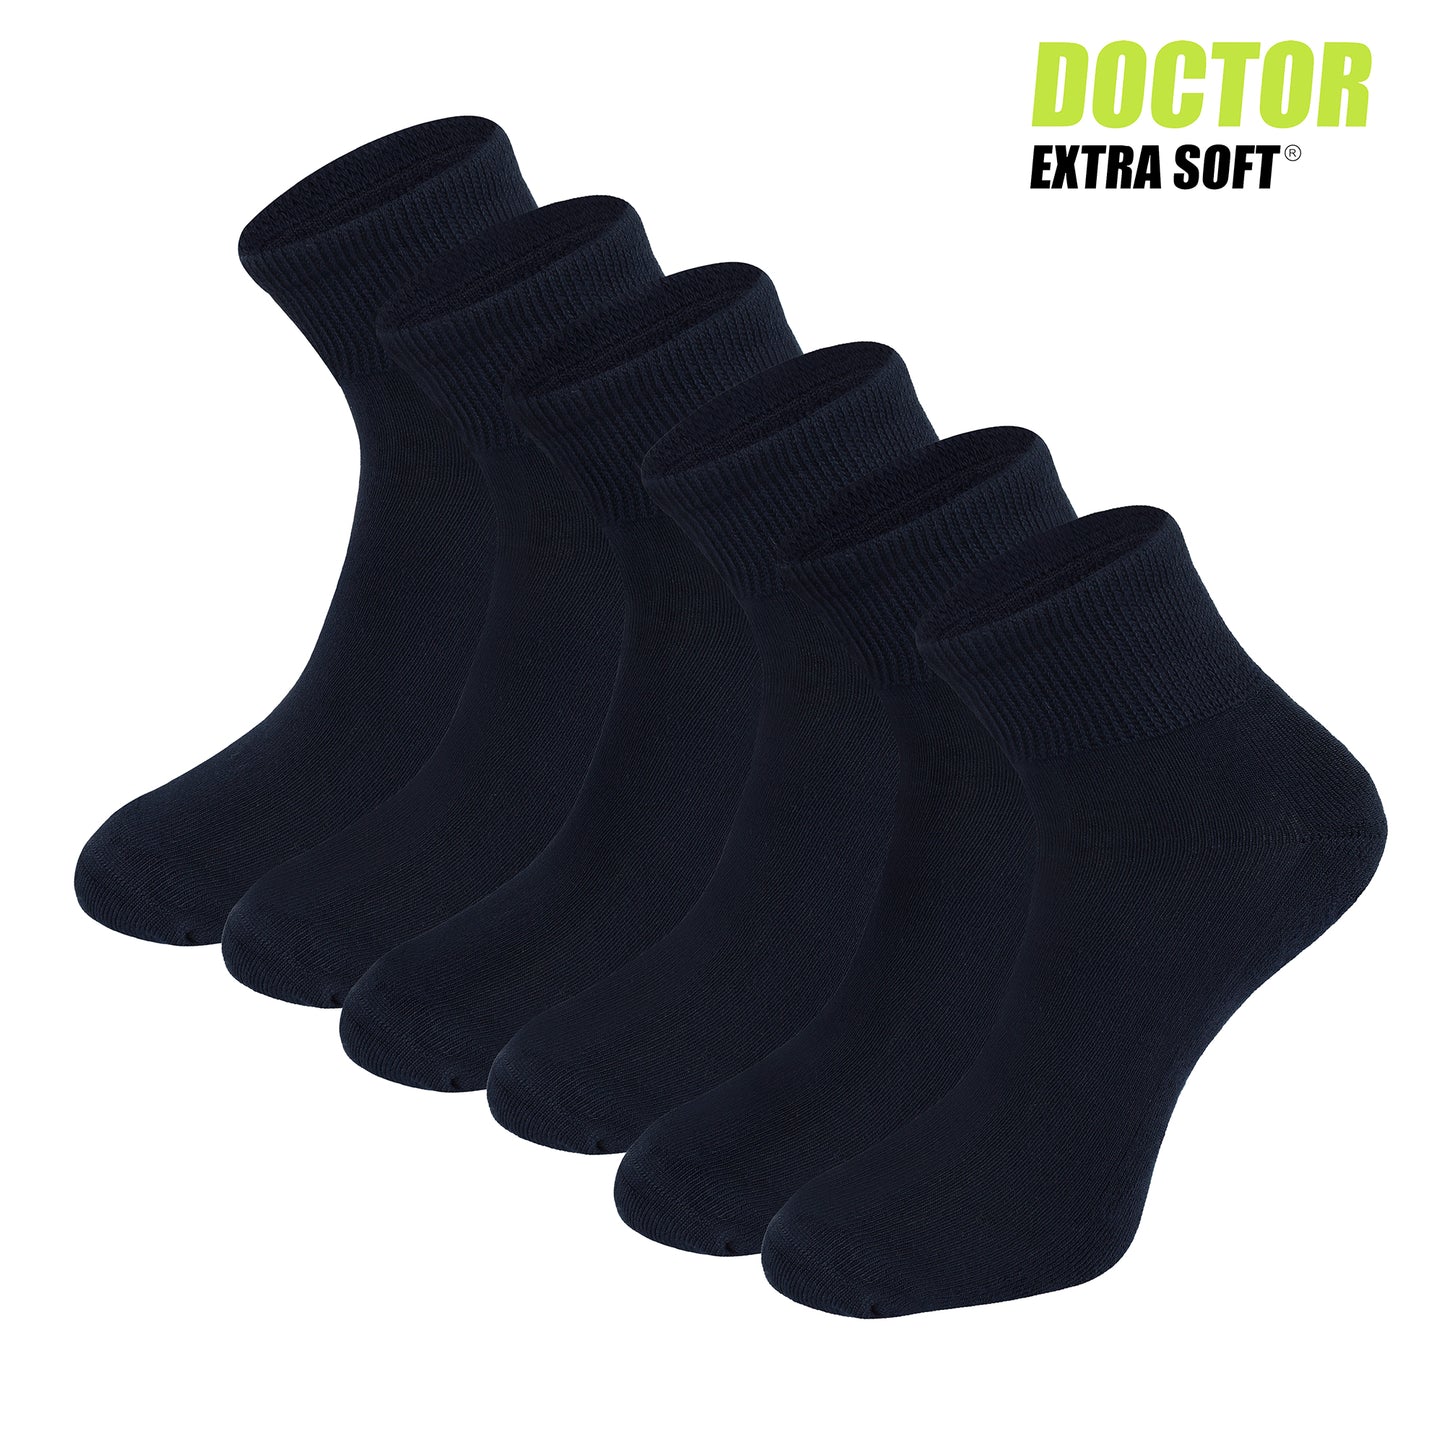 DOCTOR EXTRA SOFT 301 Men's Premium Cushioned Bamboo Ankle Socks| Half Terry, Odour-Free & Breathable| Ideal For Sports, Sneaker, Running, Gym Training, Athletic| Everyday Use Gent's/Boys PACK OF 3 (Free Size)